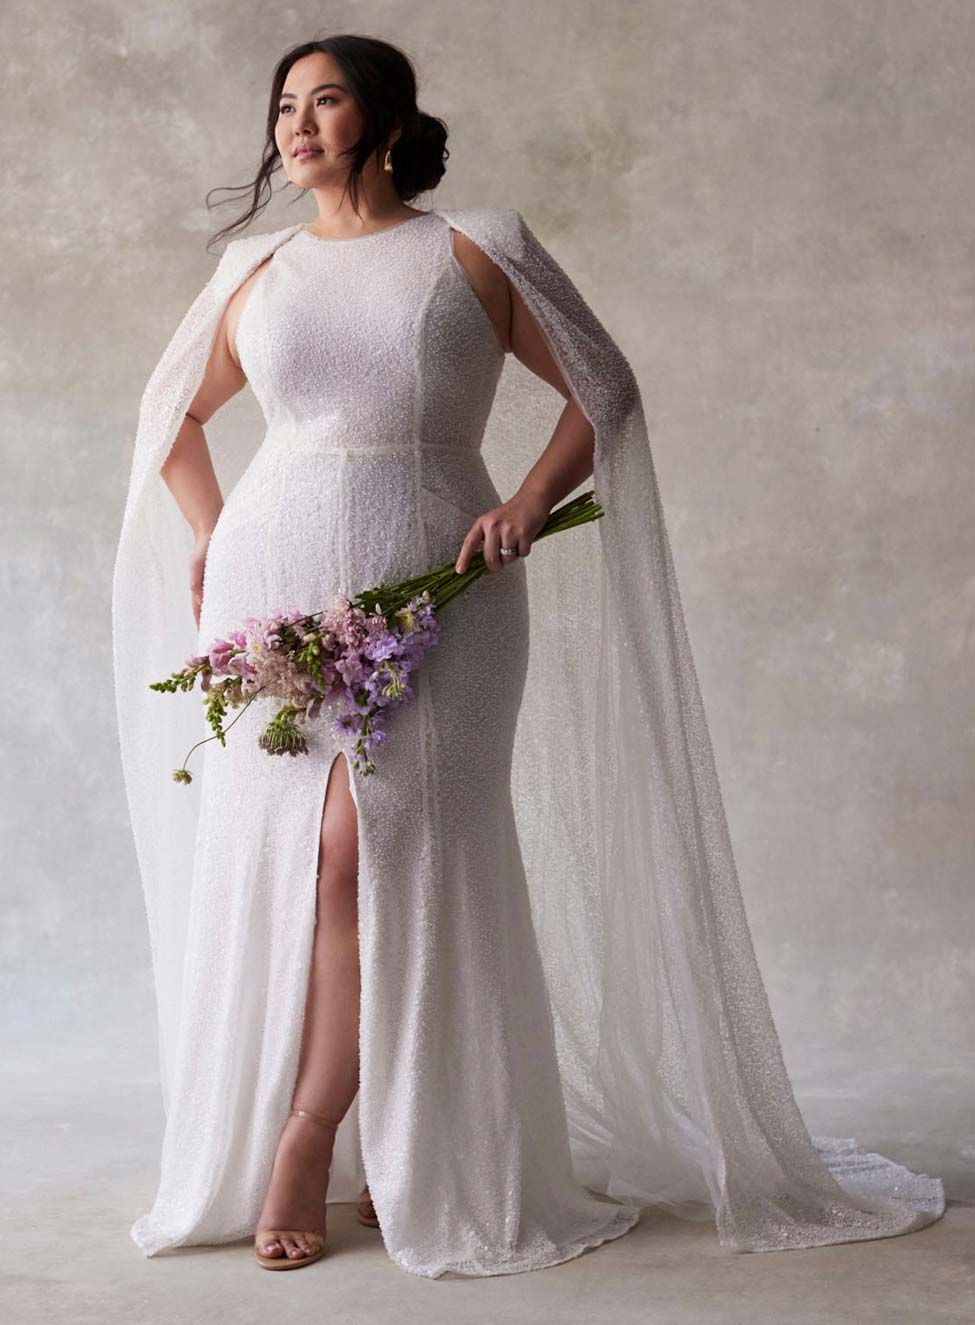 Made to Measure Plus Size Wedding Dresses - Bespoke Bridal Gowns  Plus  wedding dresses, Plus size wedding dresses with sleeves, Wedding gowns with  sleeves